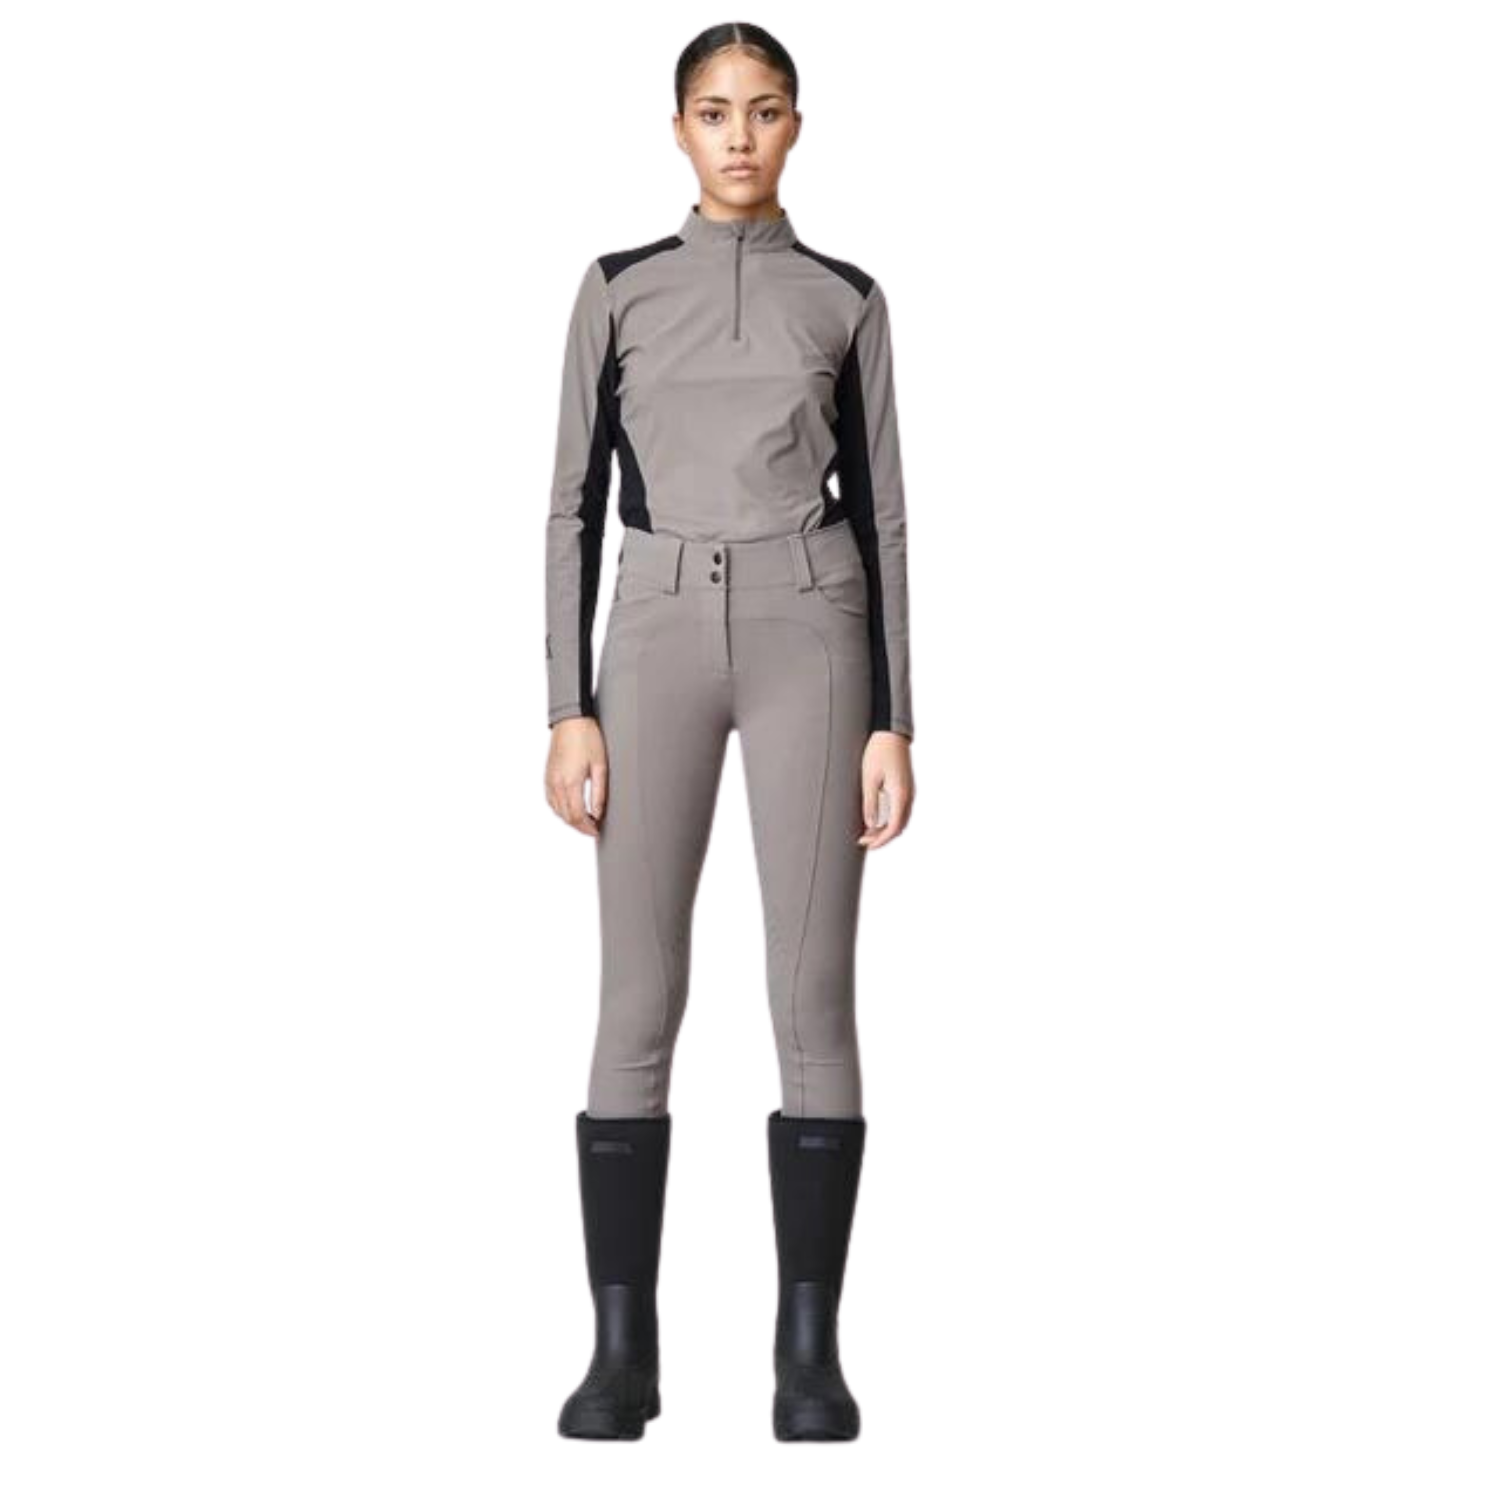 Ladies Compression High Rise Performance Knee Grip Breeches - Taupe